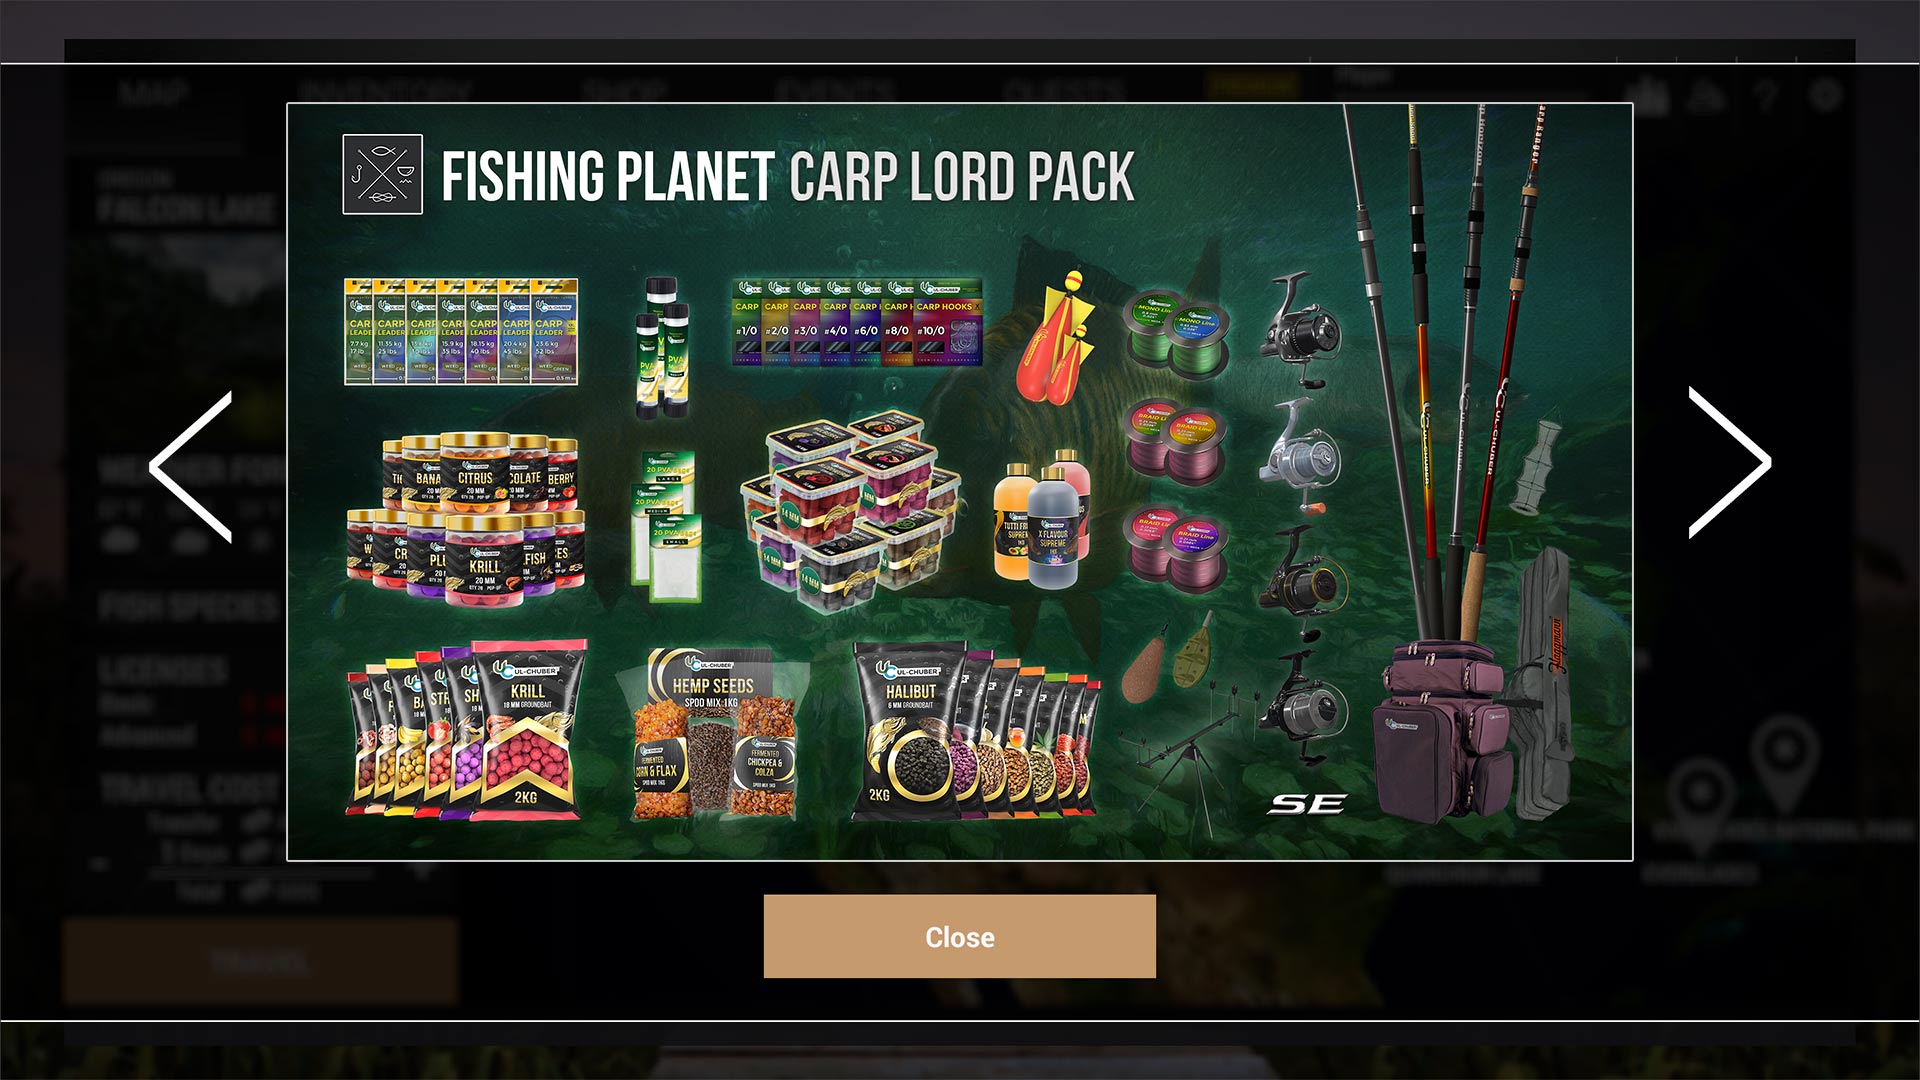 Fishing planet читы 2024. Fishing Planet Карп. Fishing Planet таблица рыб. Бонус коды Fishing Planet. Fishing Planet Sport outfit Pack.